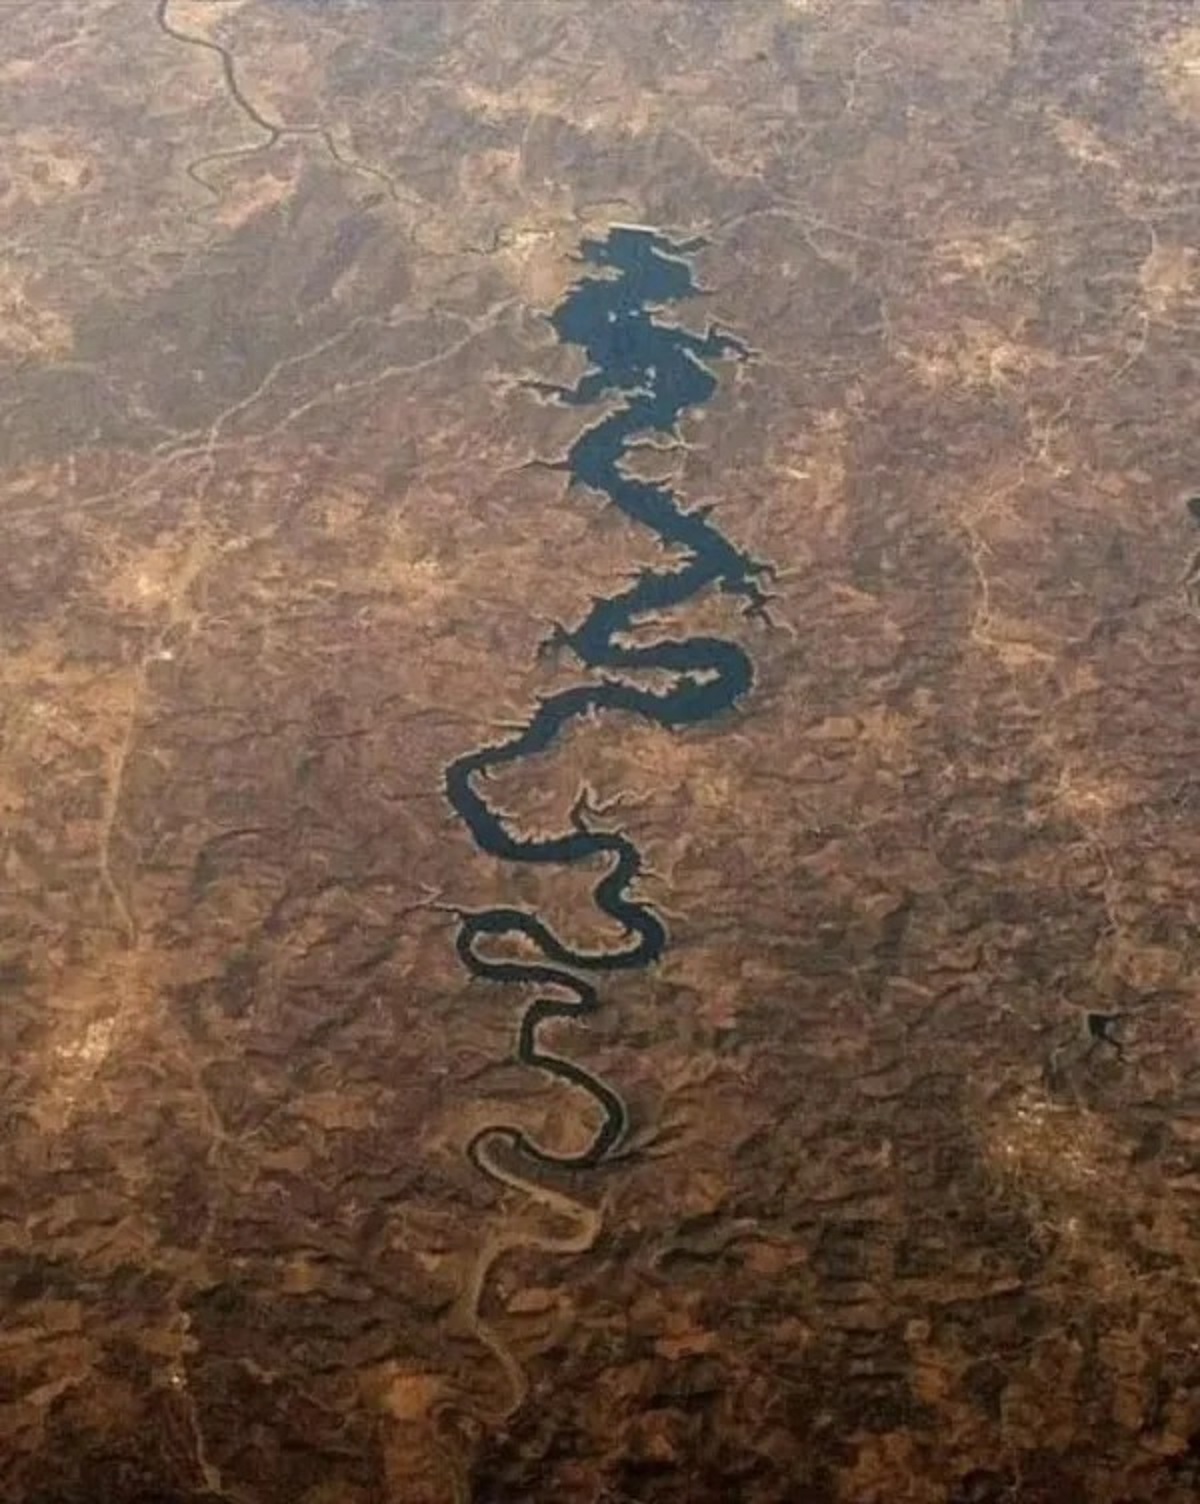 The Blue Dragon River in Portugal. Seen from space.